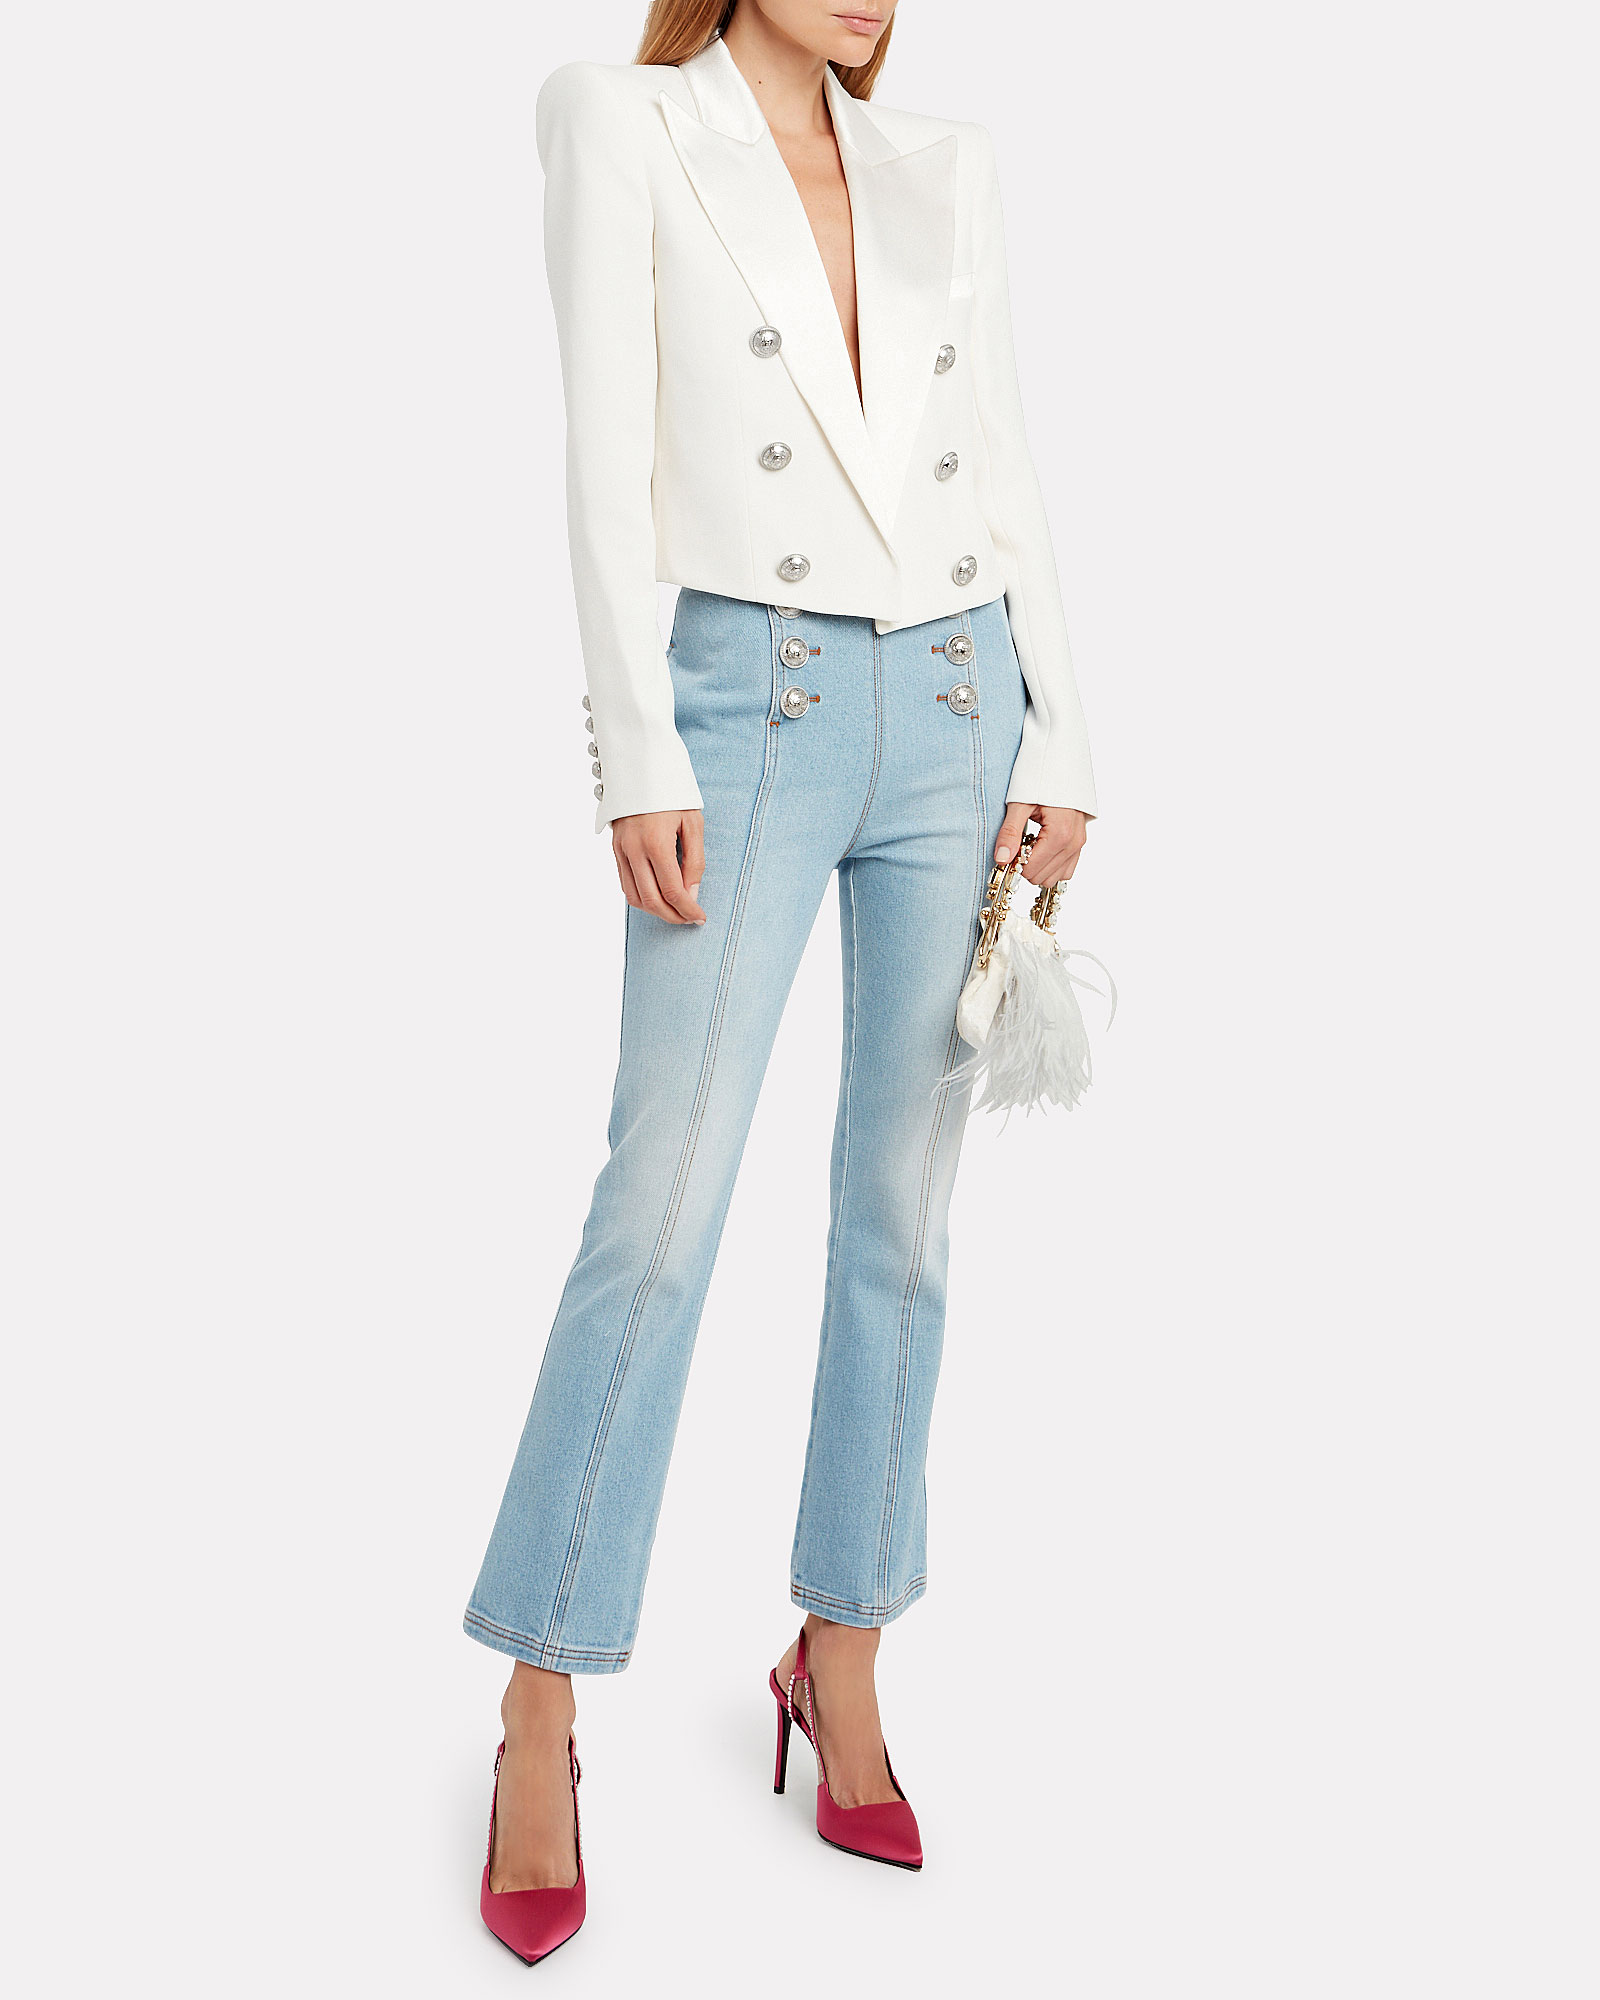 Balmain | Cropped Double Breasted Crepe Blazer | INTERMIX®